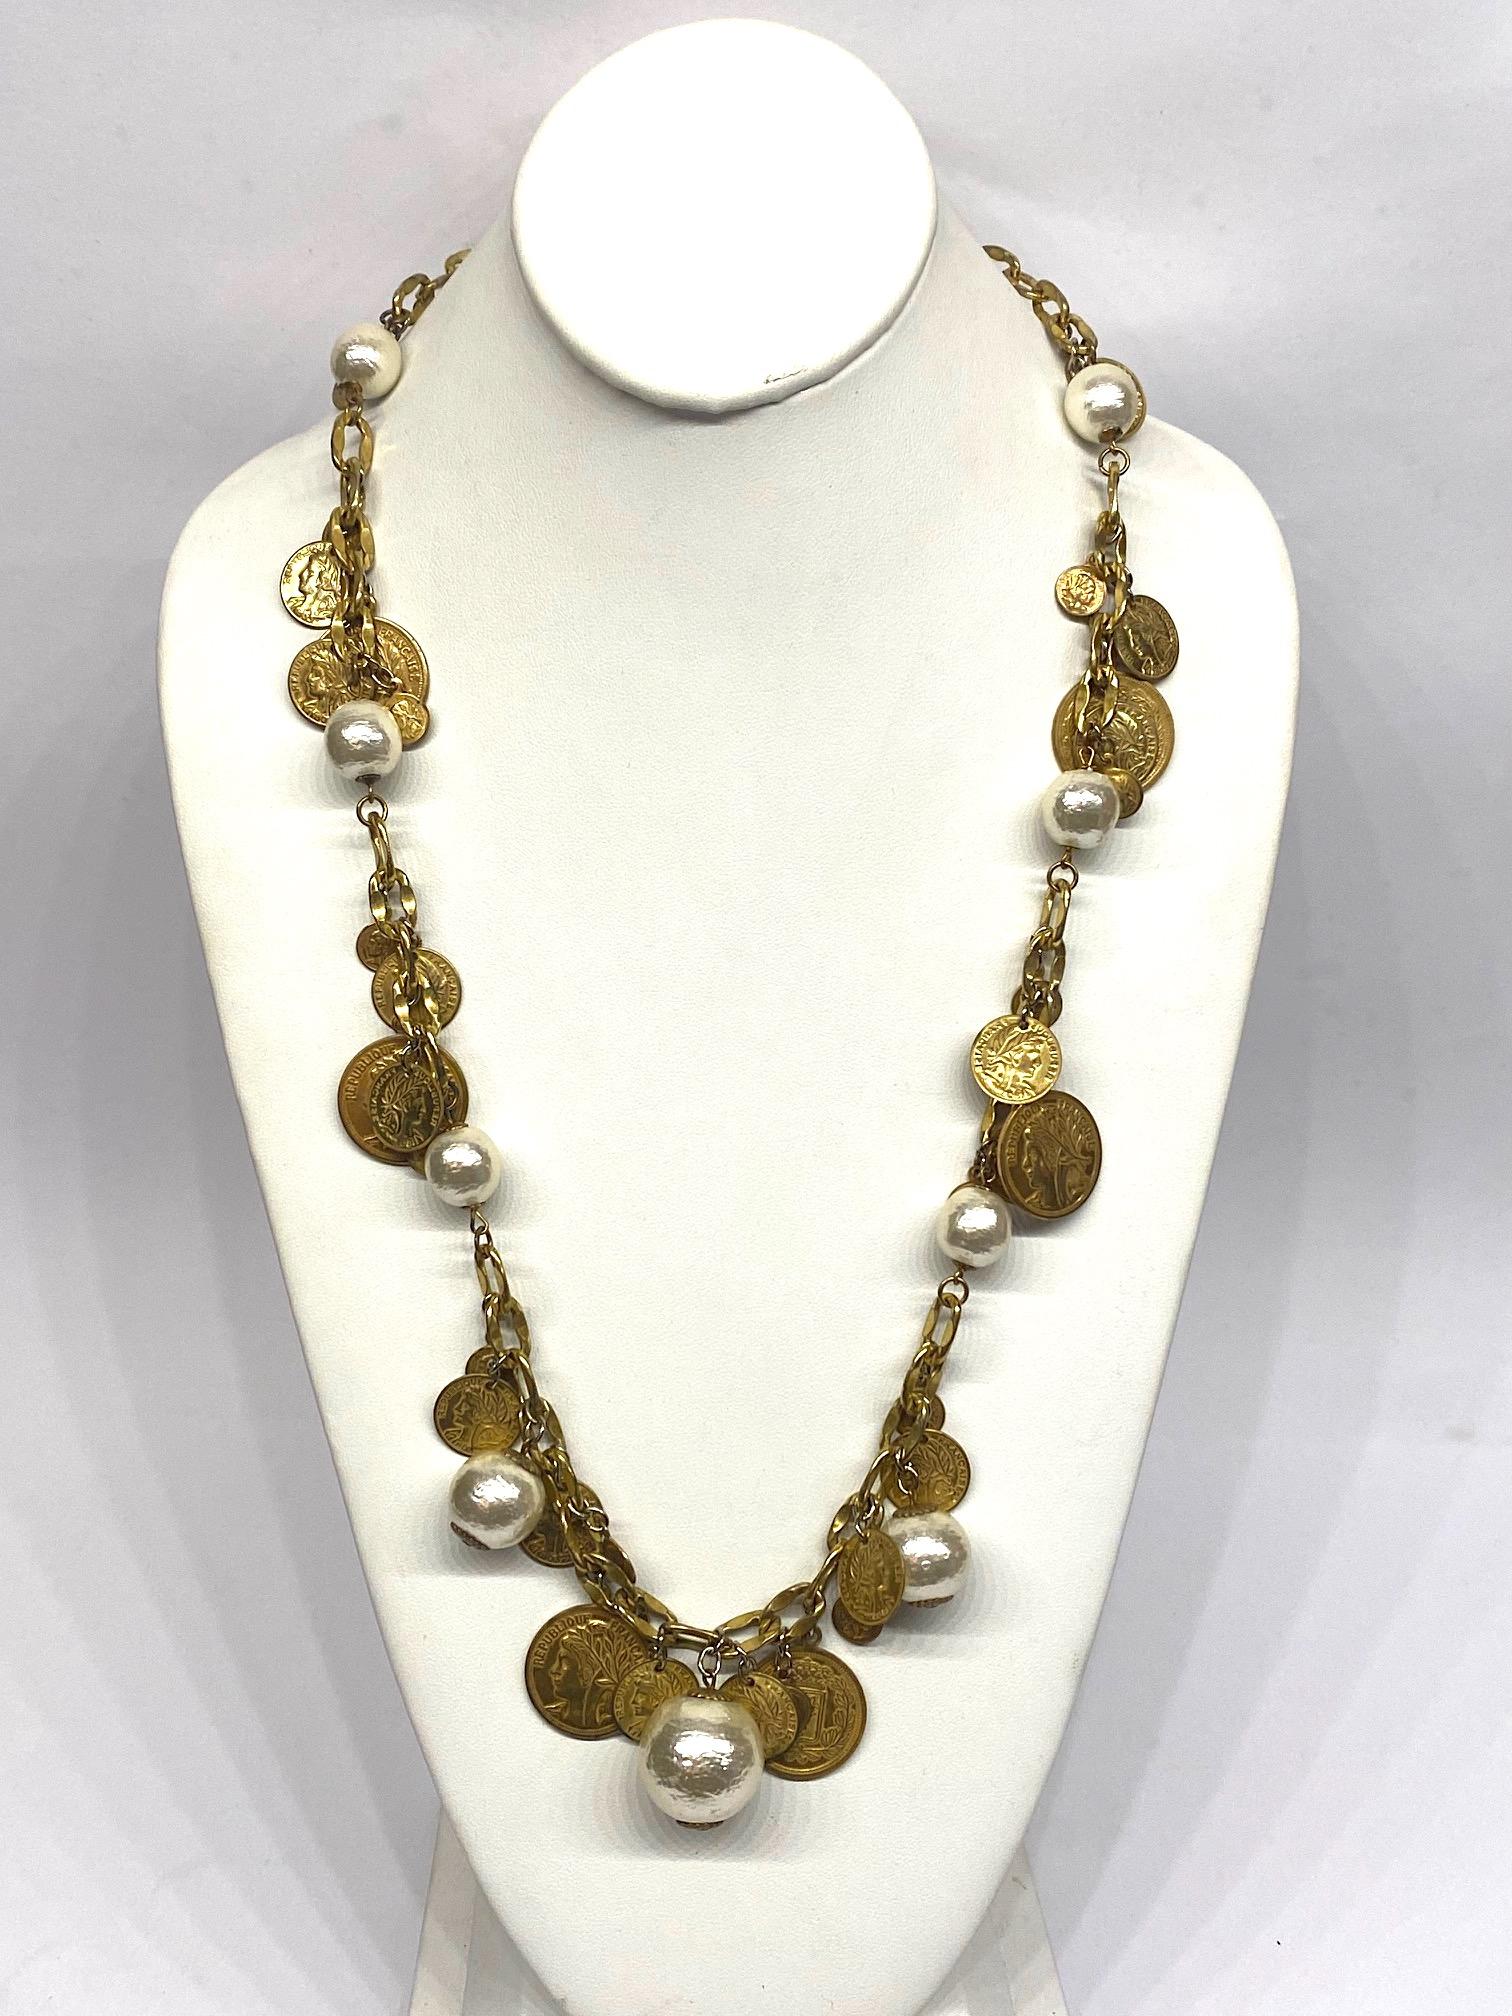 A wonderful 1960s Miriam Haskell long chain necklace with coin and pearl charms. The necklace is in Haskell's signature Russian gold finish of antique mat gold. Each link is .38 of an inch wide by .5 of an inch long. The 33 inch long necklace has